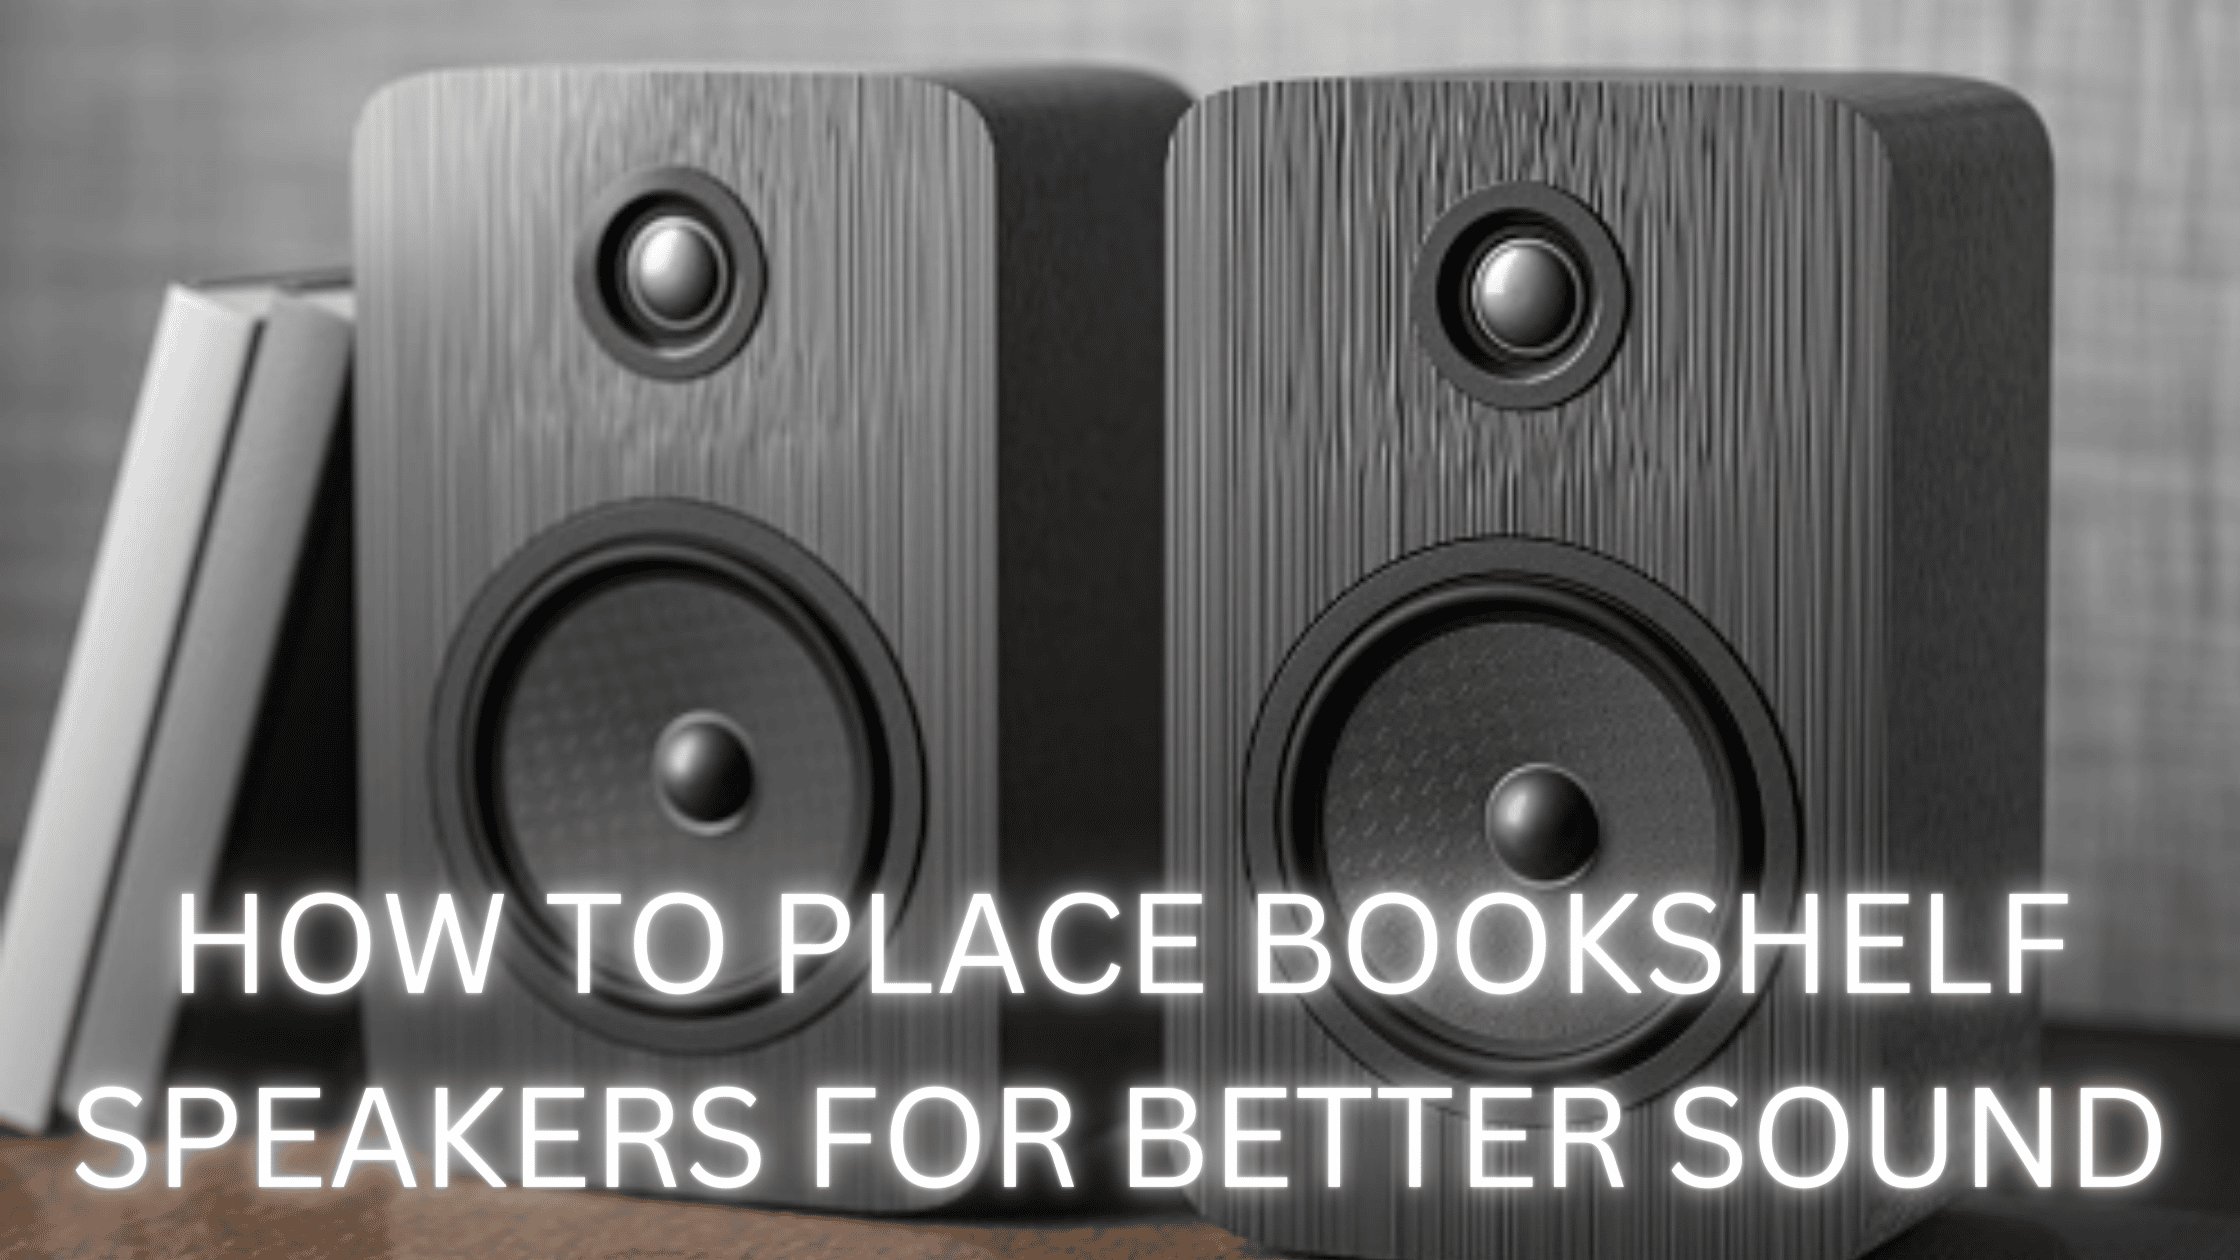 HOW TO PLACE BOOKSHELF SPEAKERS FOR BETTER SOUND